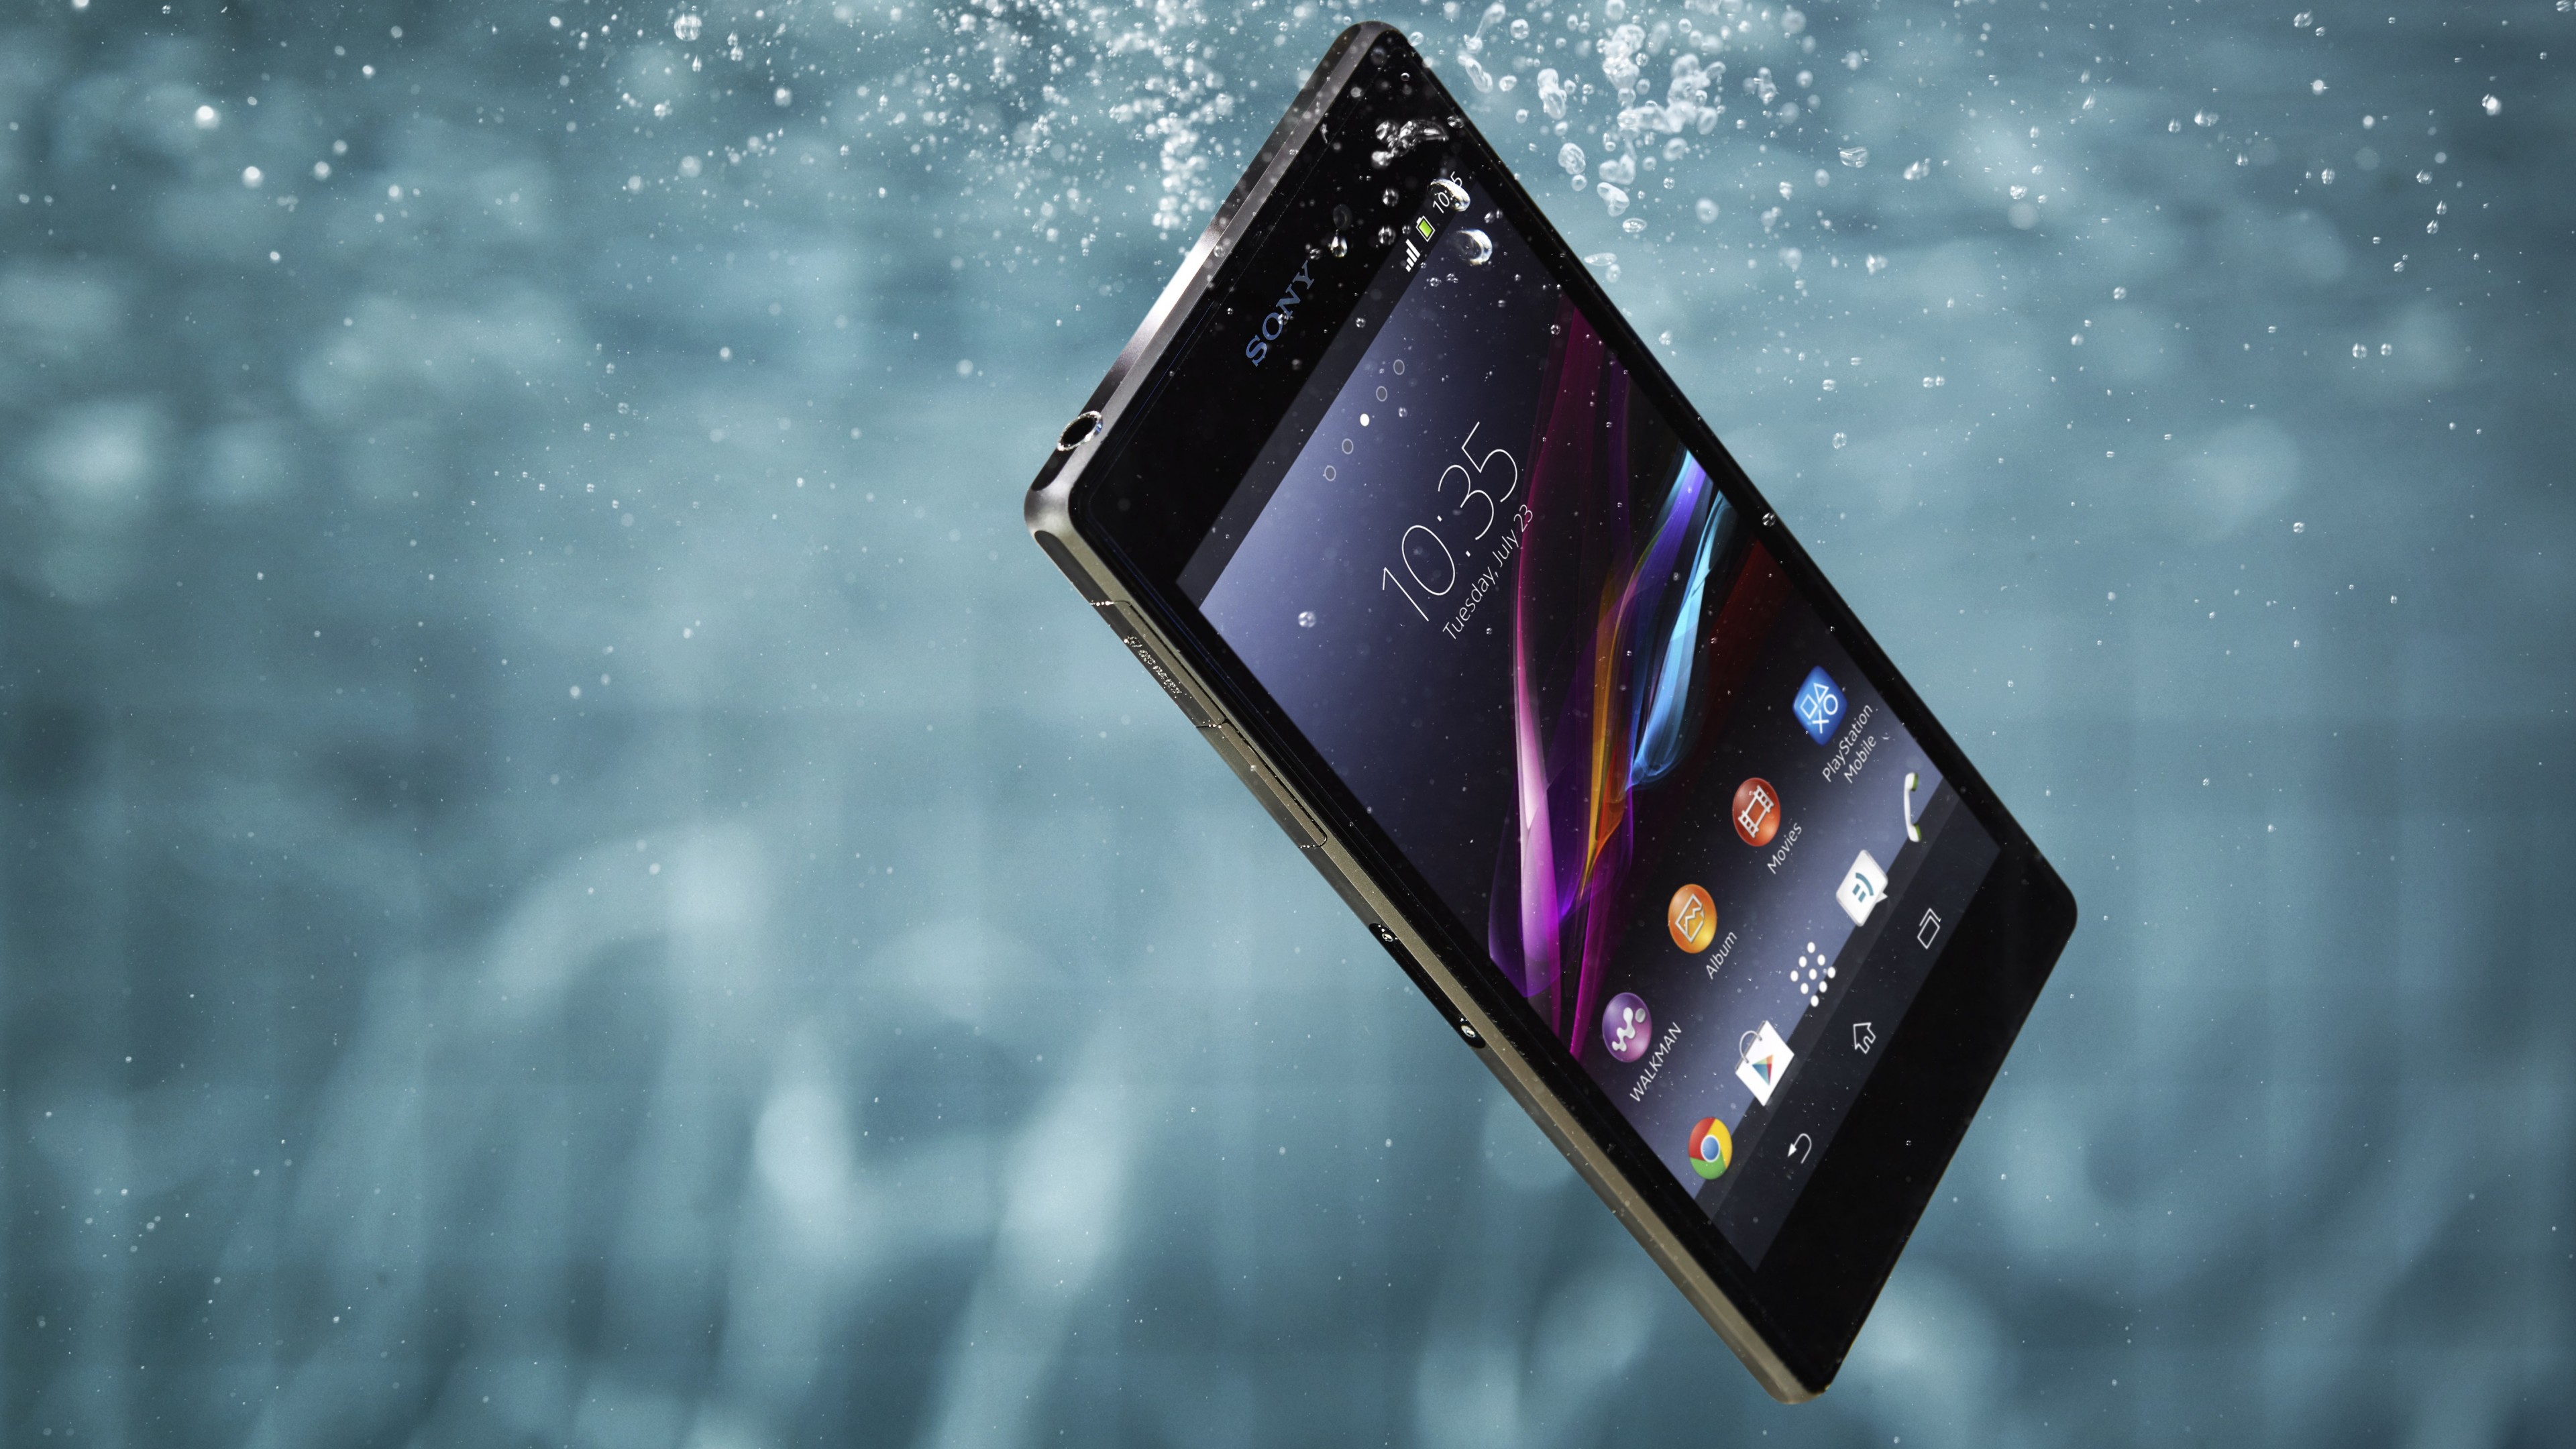 Sony Xperia Z1 Price In South Africa - HD Wallpaper 